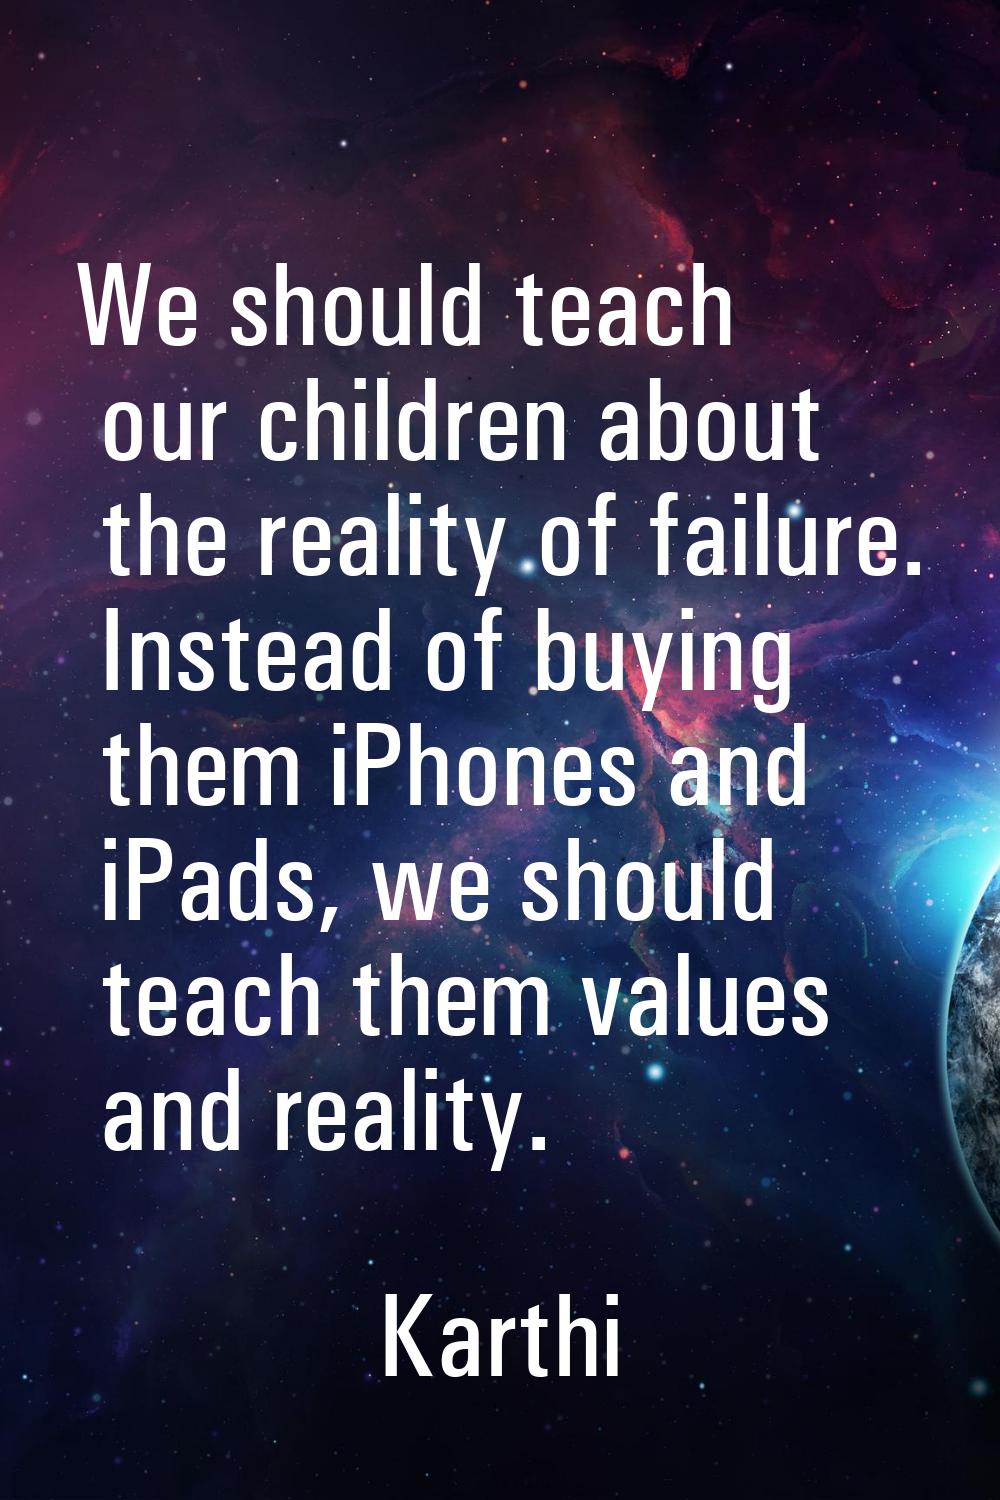 We should teach our children about the reality of failure. Instead of buying them iPhones and iPads